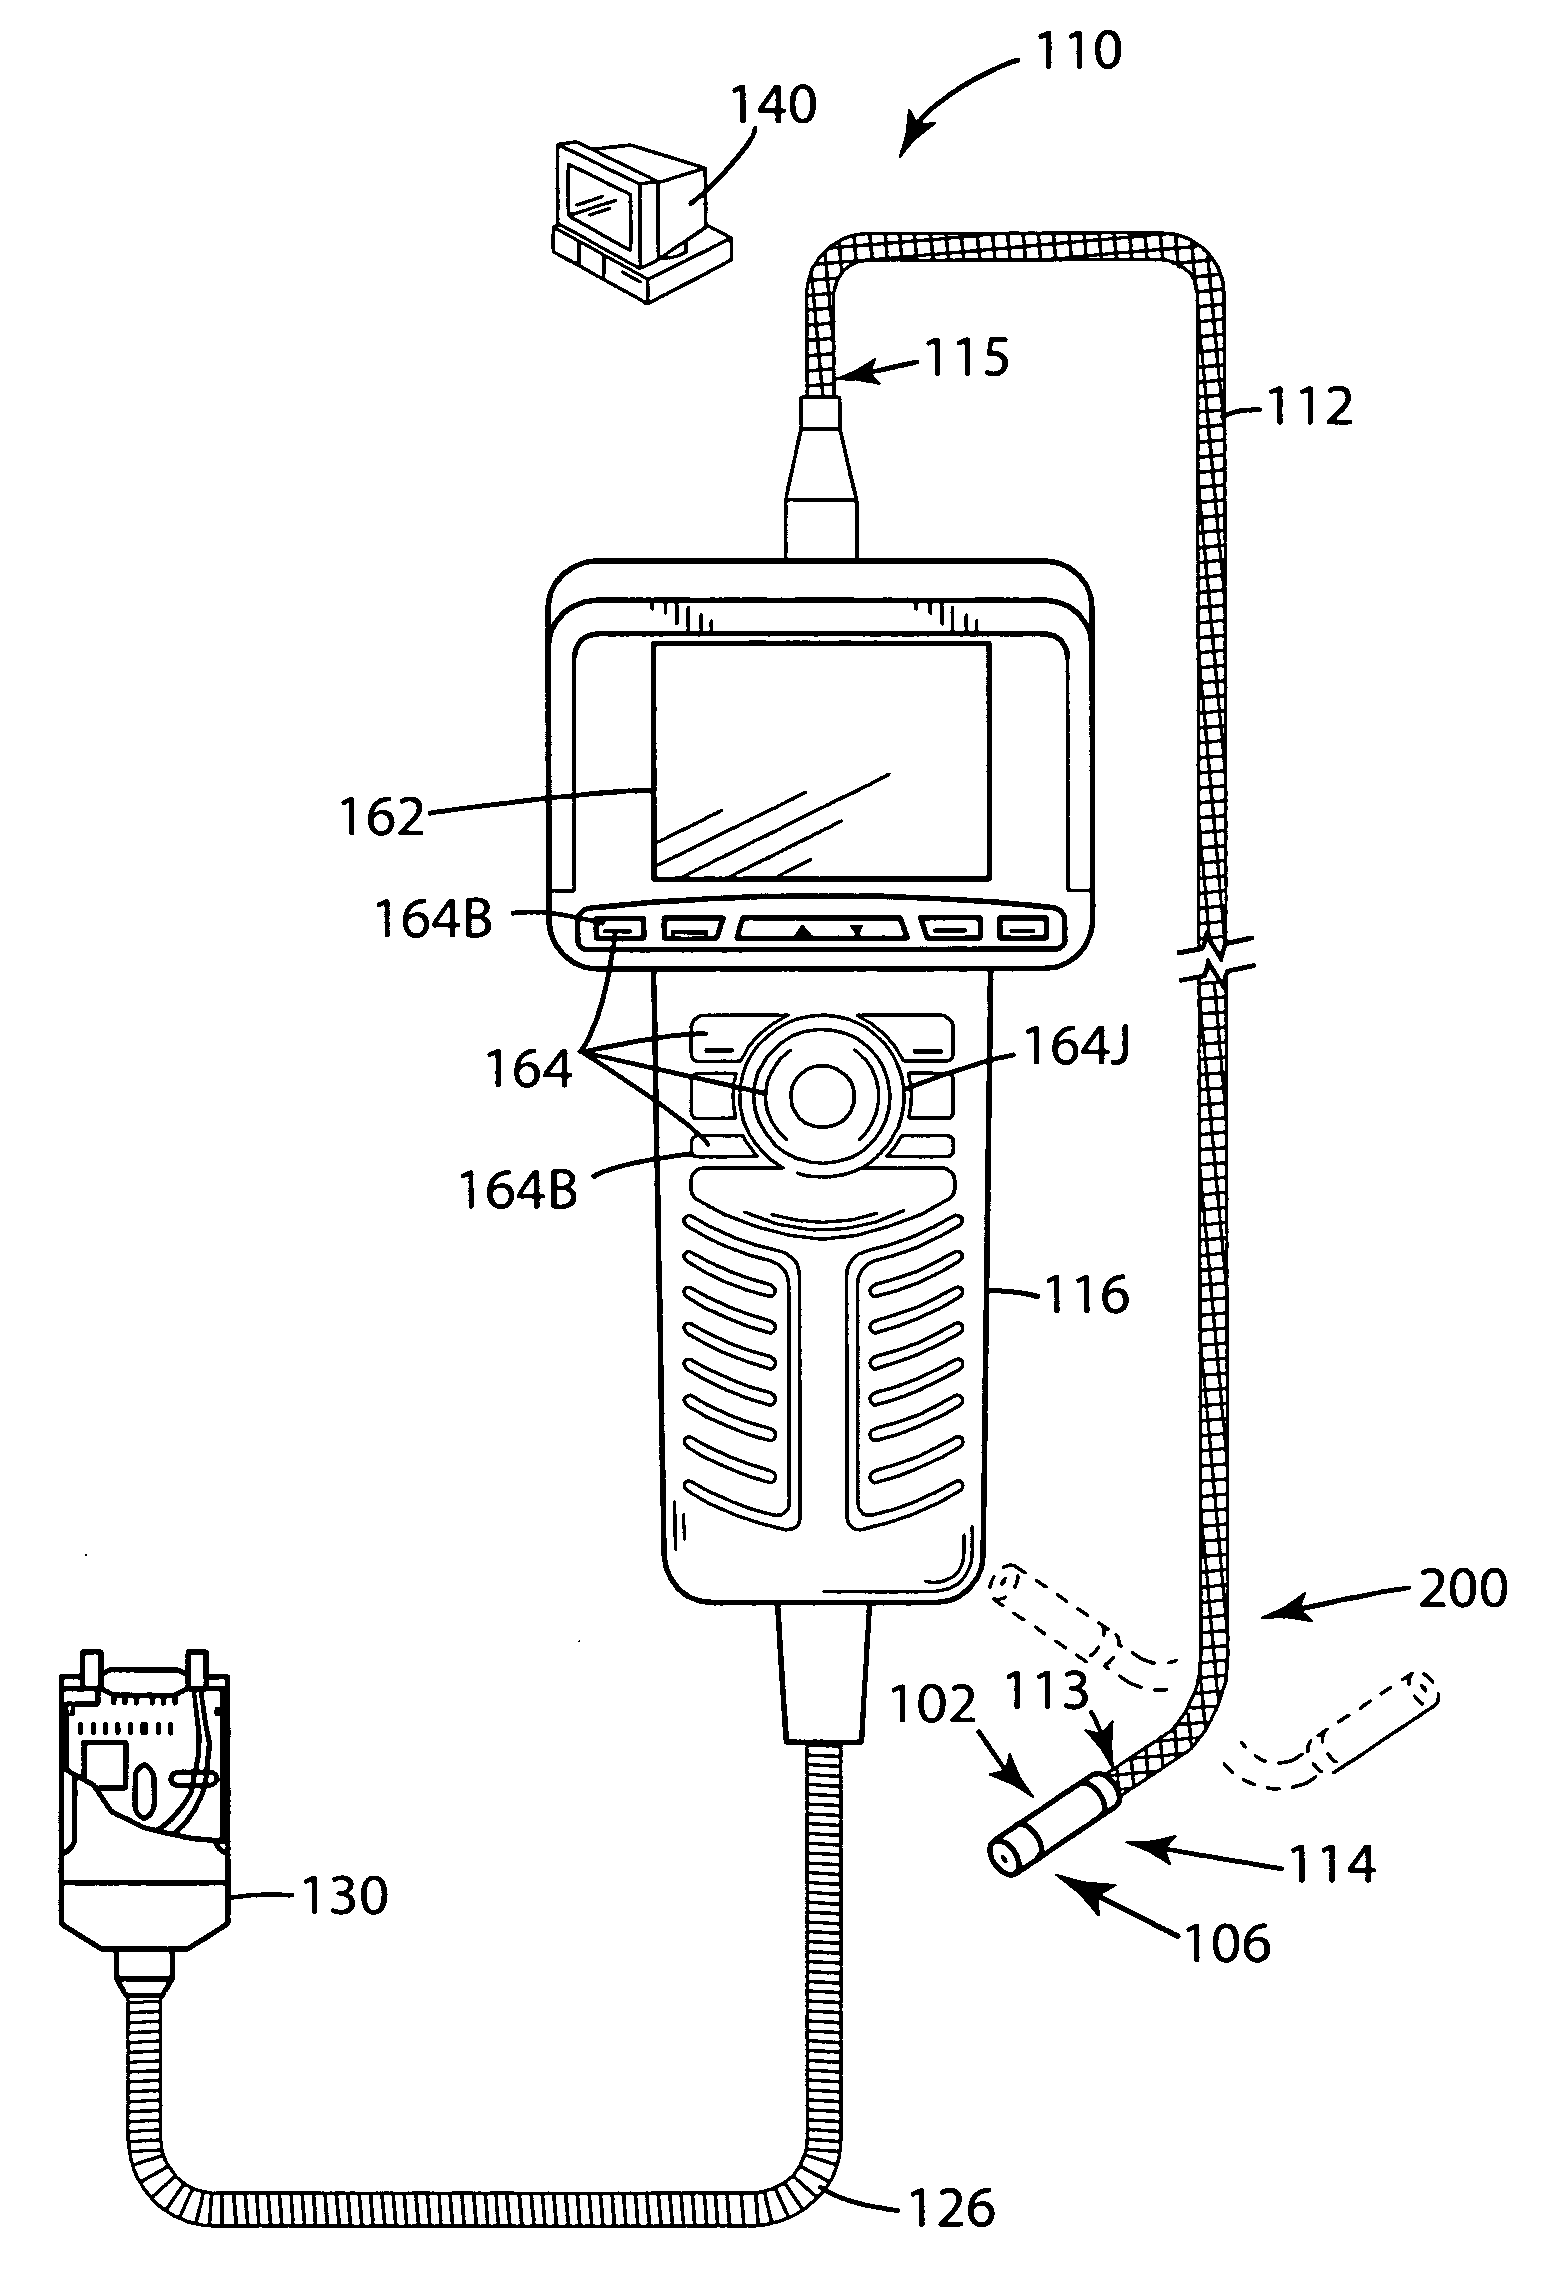 Heat protection systems and methods for remote viewing devices